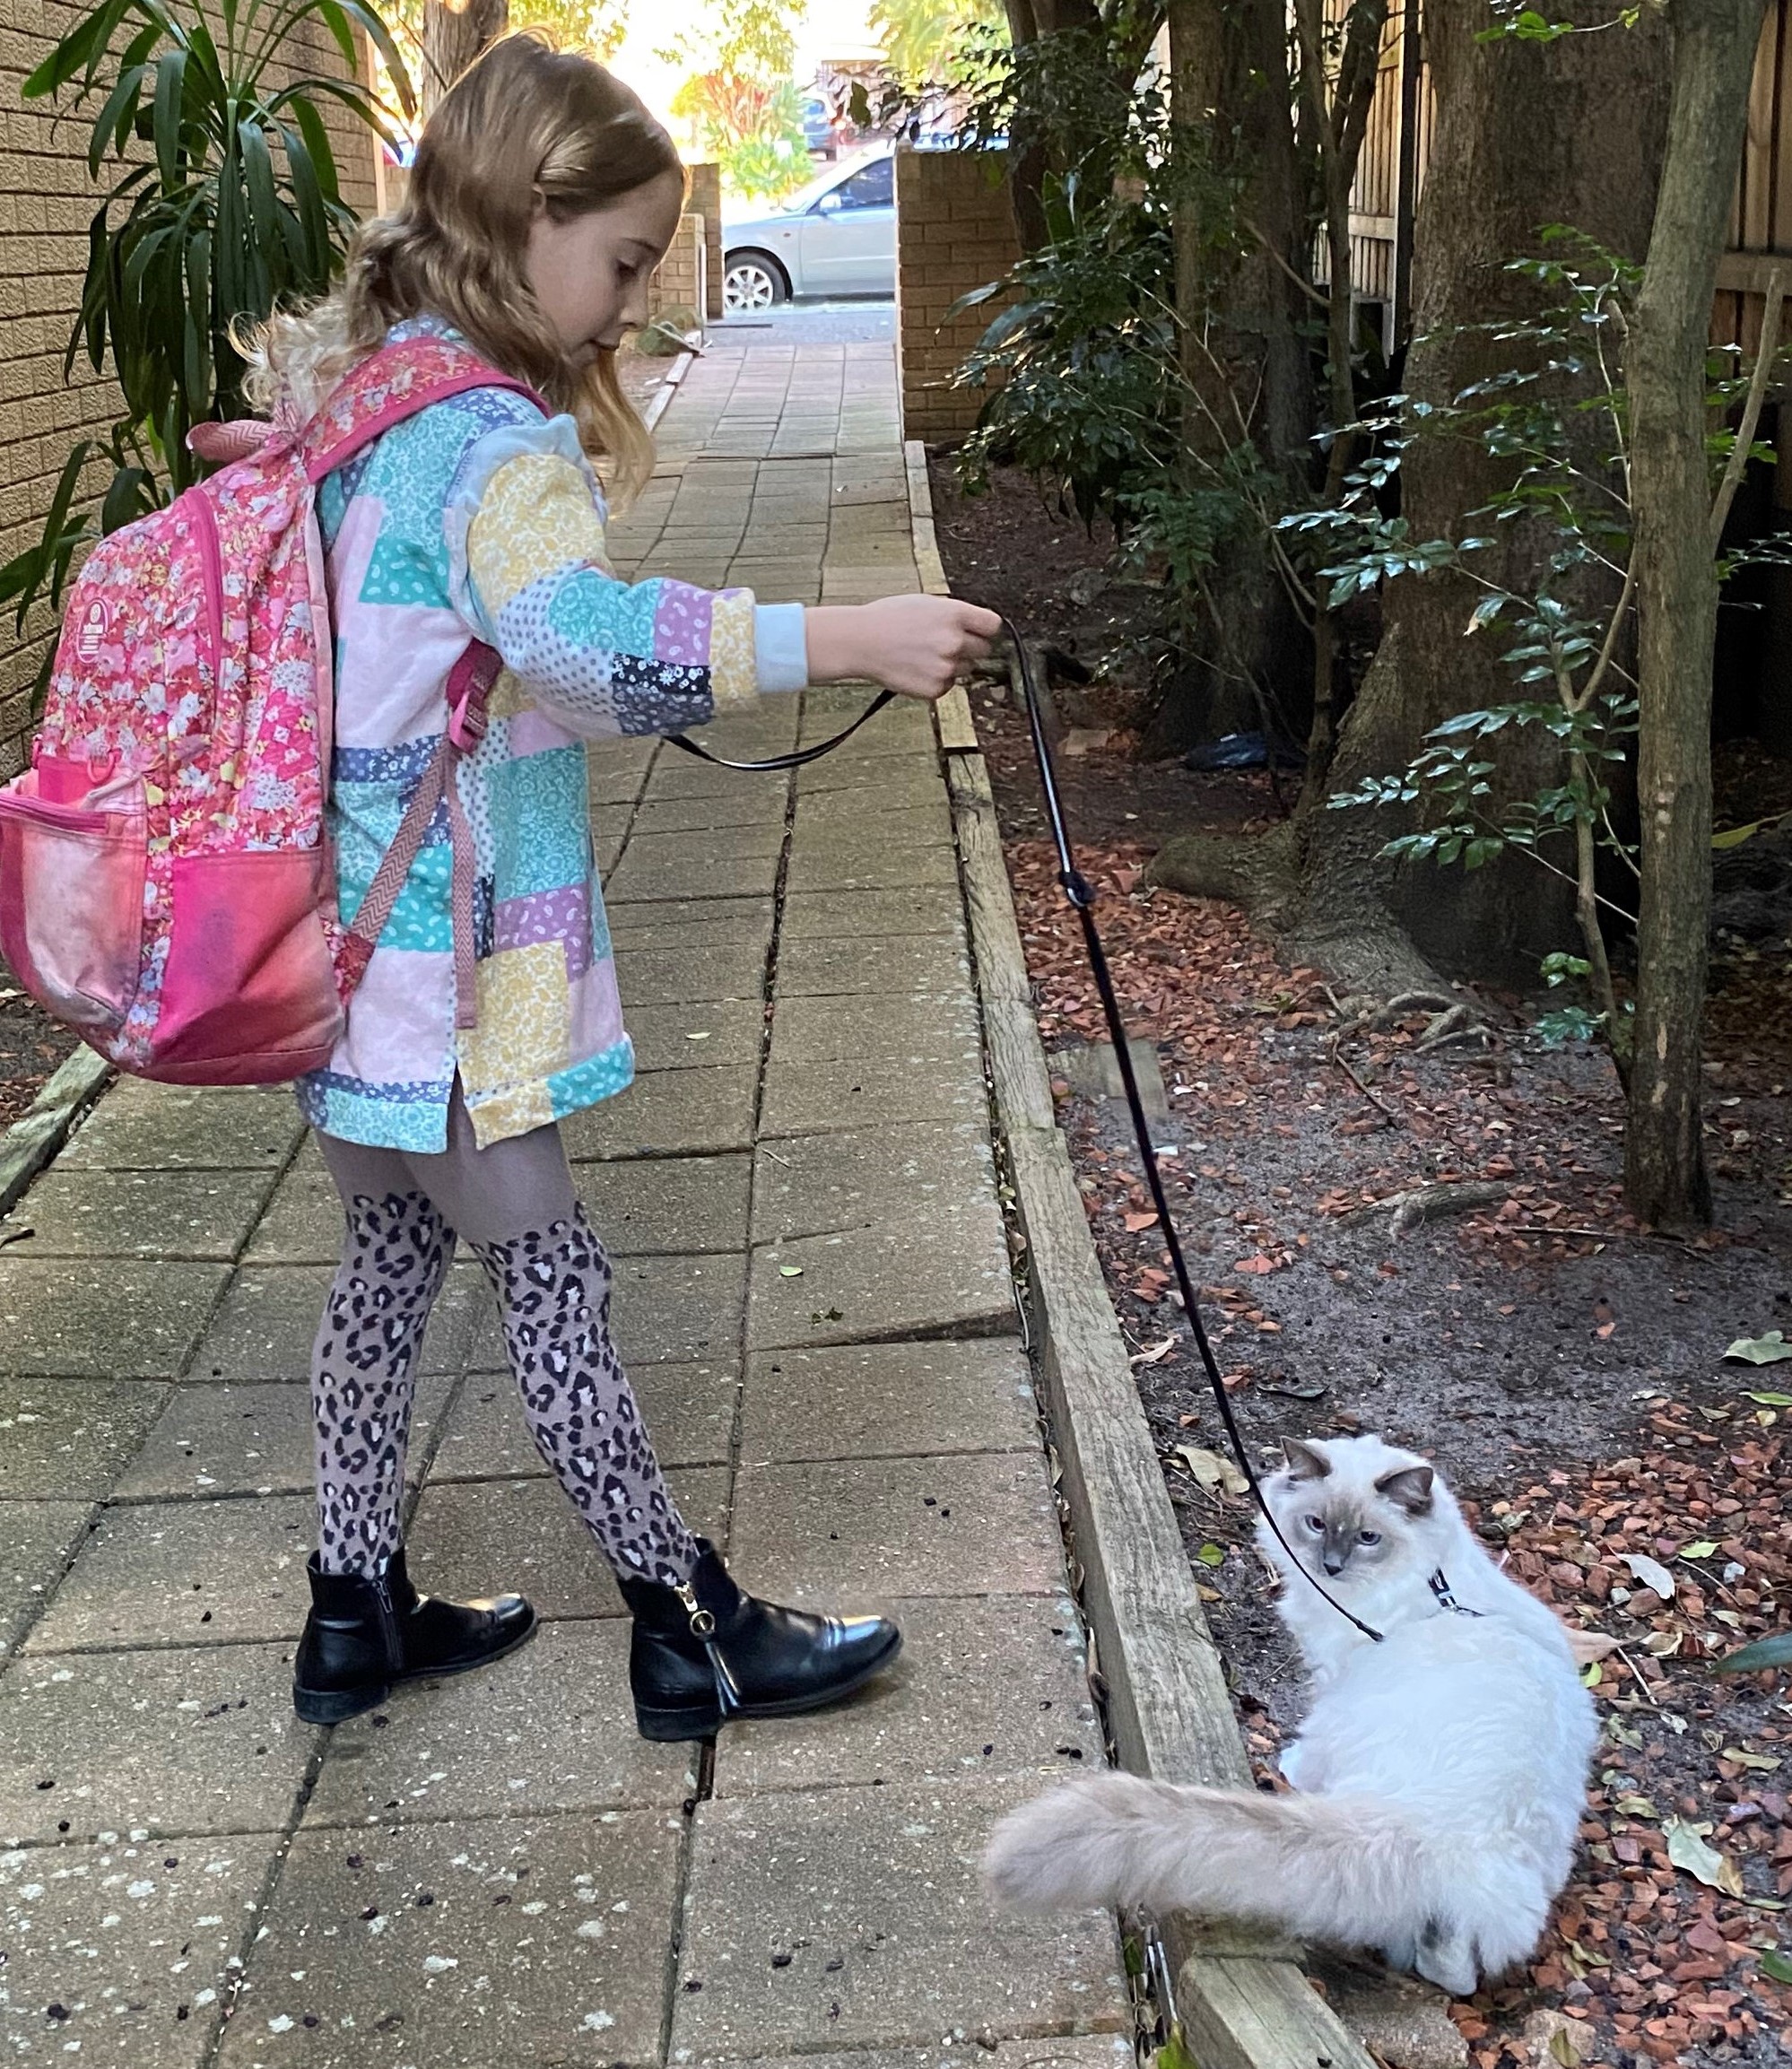 Young girl walking cat on lead